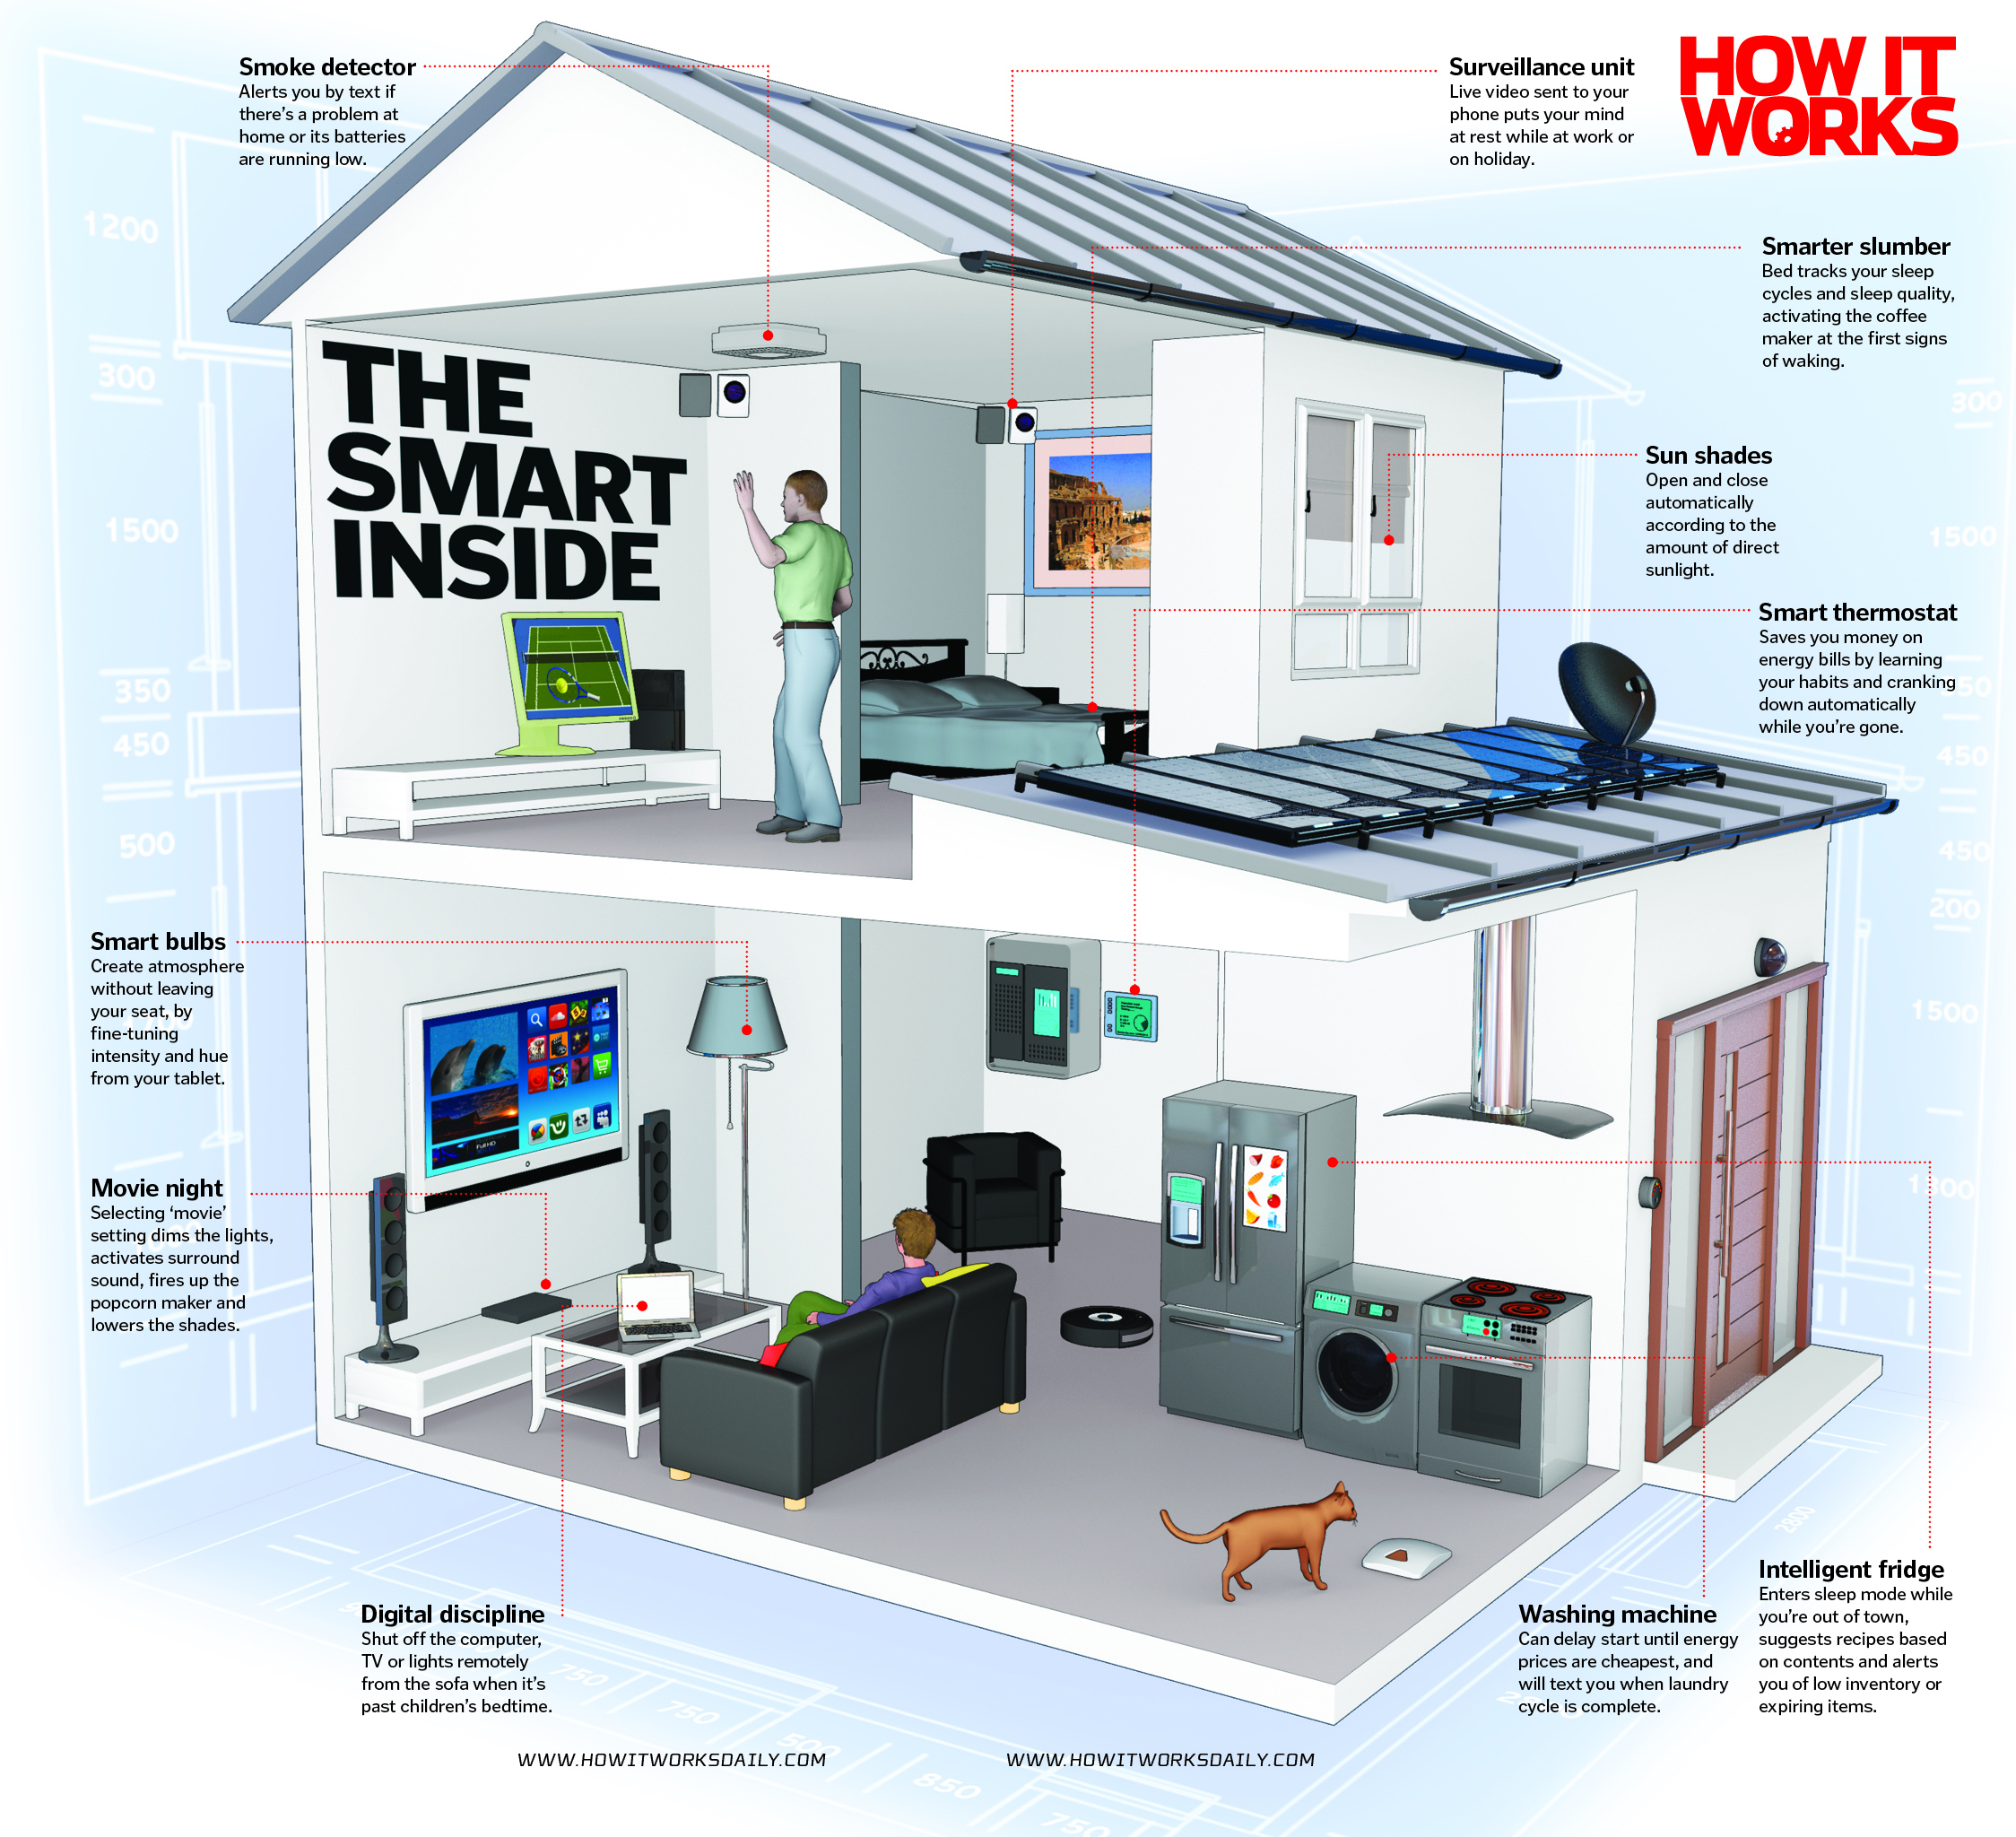 Your smart home of the future | How It Works Magazine